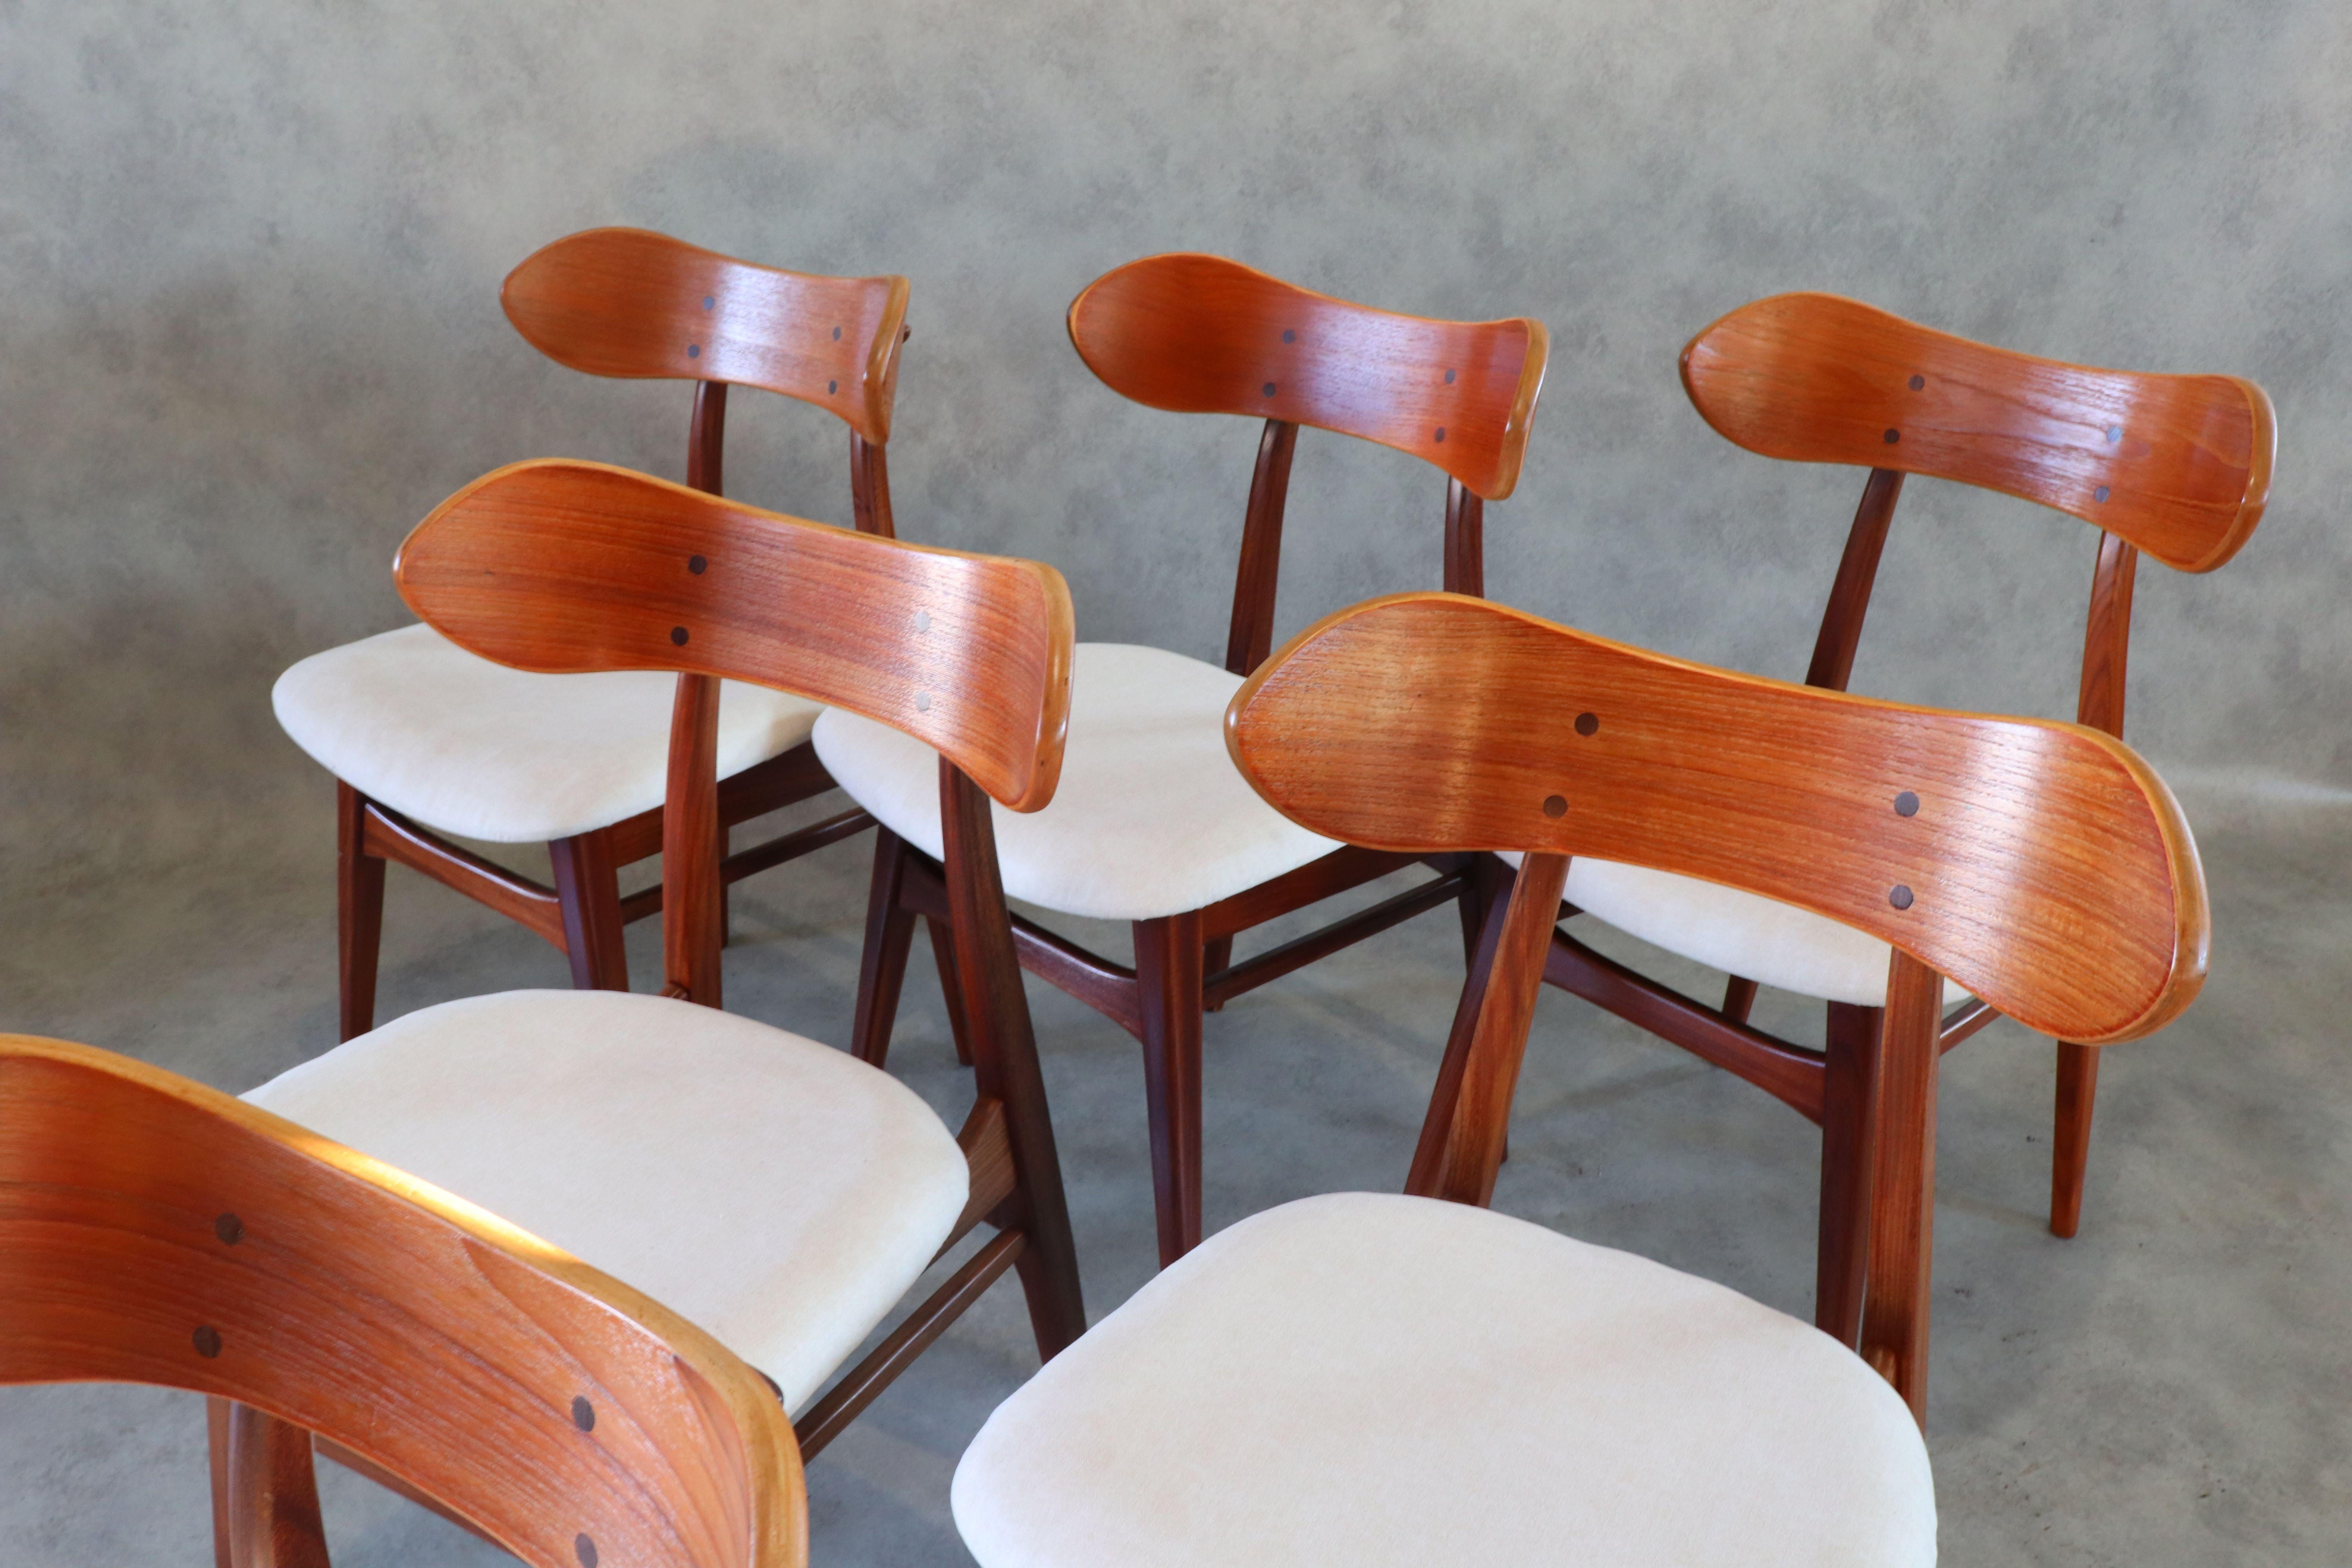 Mid-20th Century 20th Century Reupholstered Teak Dining Chairs by Louis Van Teeffelen for Webe